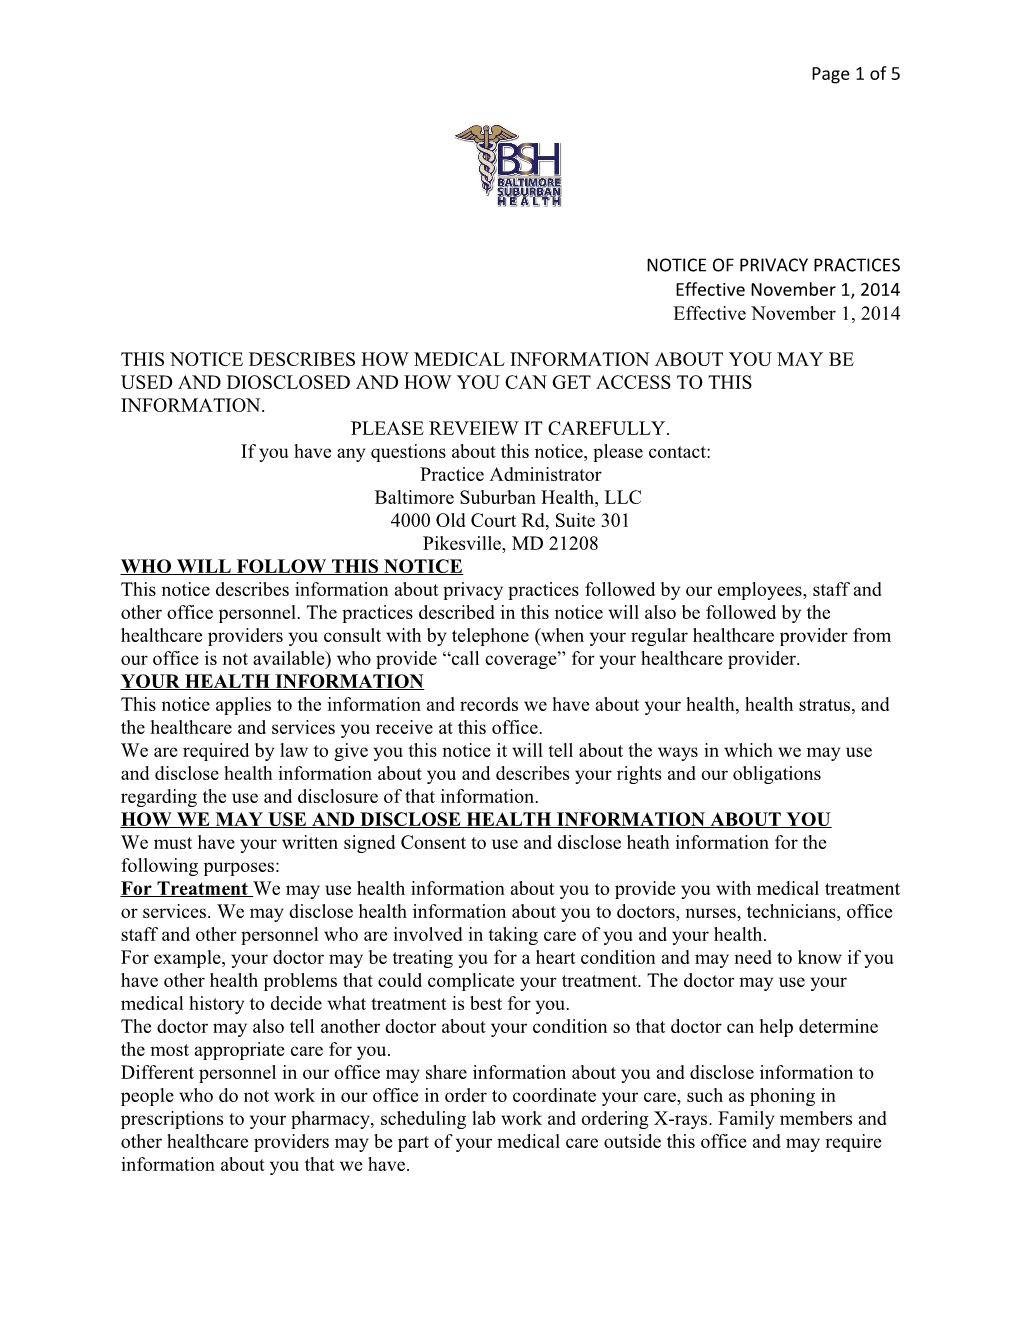 NOTICE of PRIVACY PRACTICES Effective November 1, 2014